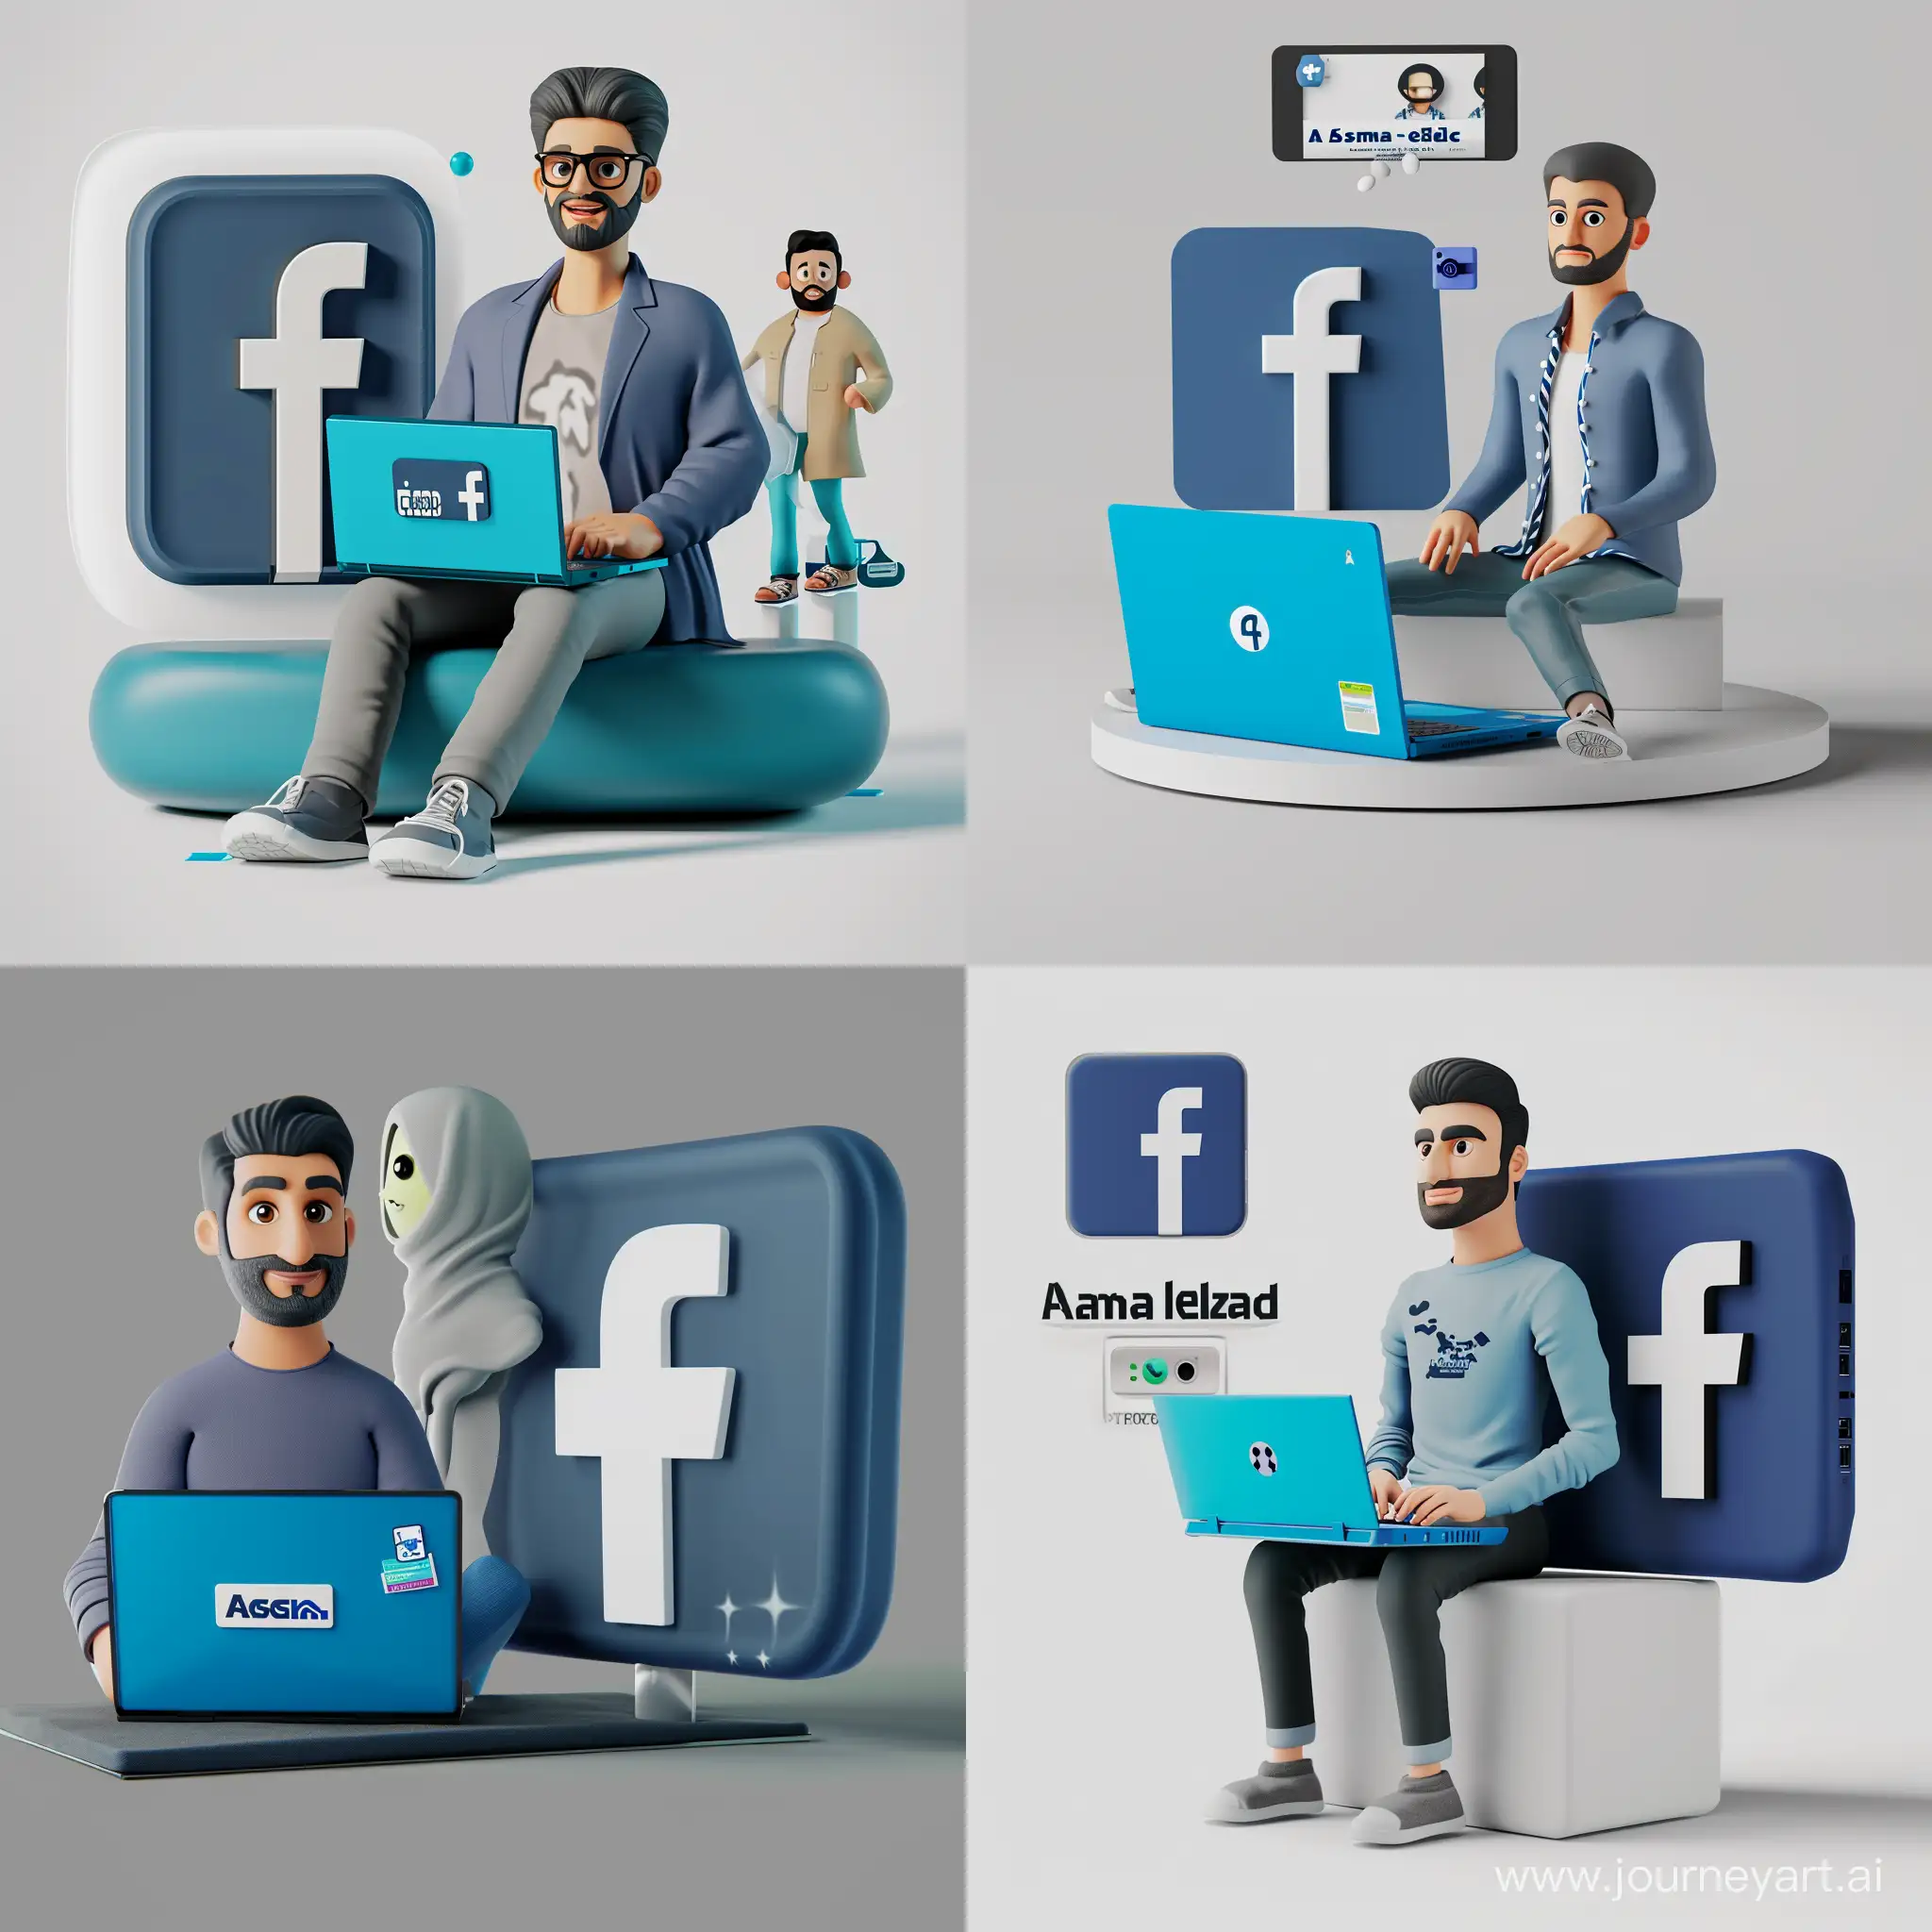 Create a 3D illustration featuring a realistic man,
casually sitting with a blue dell laptop beside of a
social media logo, specifically 'Facebook.' The
character should looks like a Graphic designer and
Enterprenure, background of the image should
showcase a social media profile page real data
username `Asma elsaid ' and a matching
